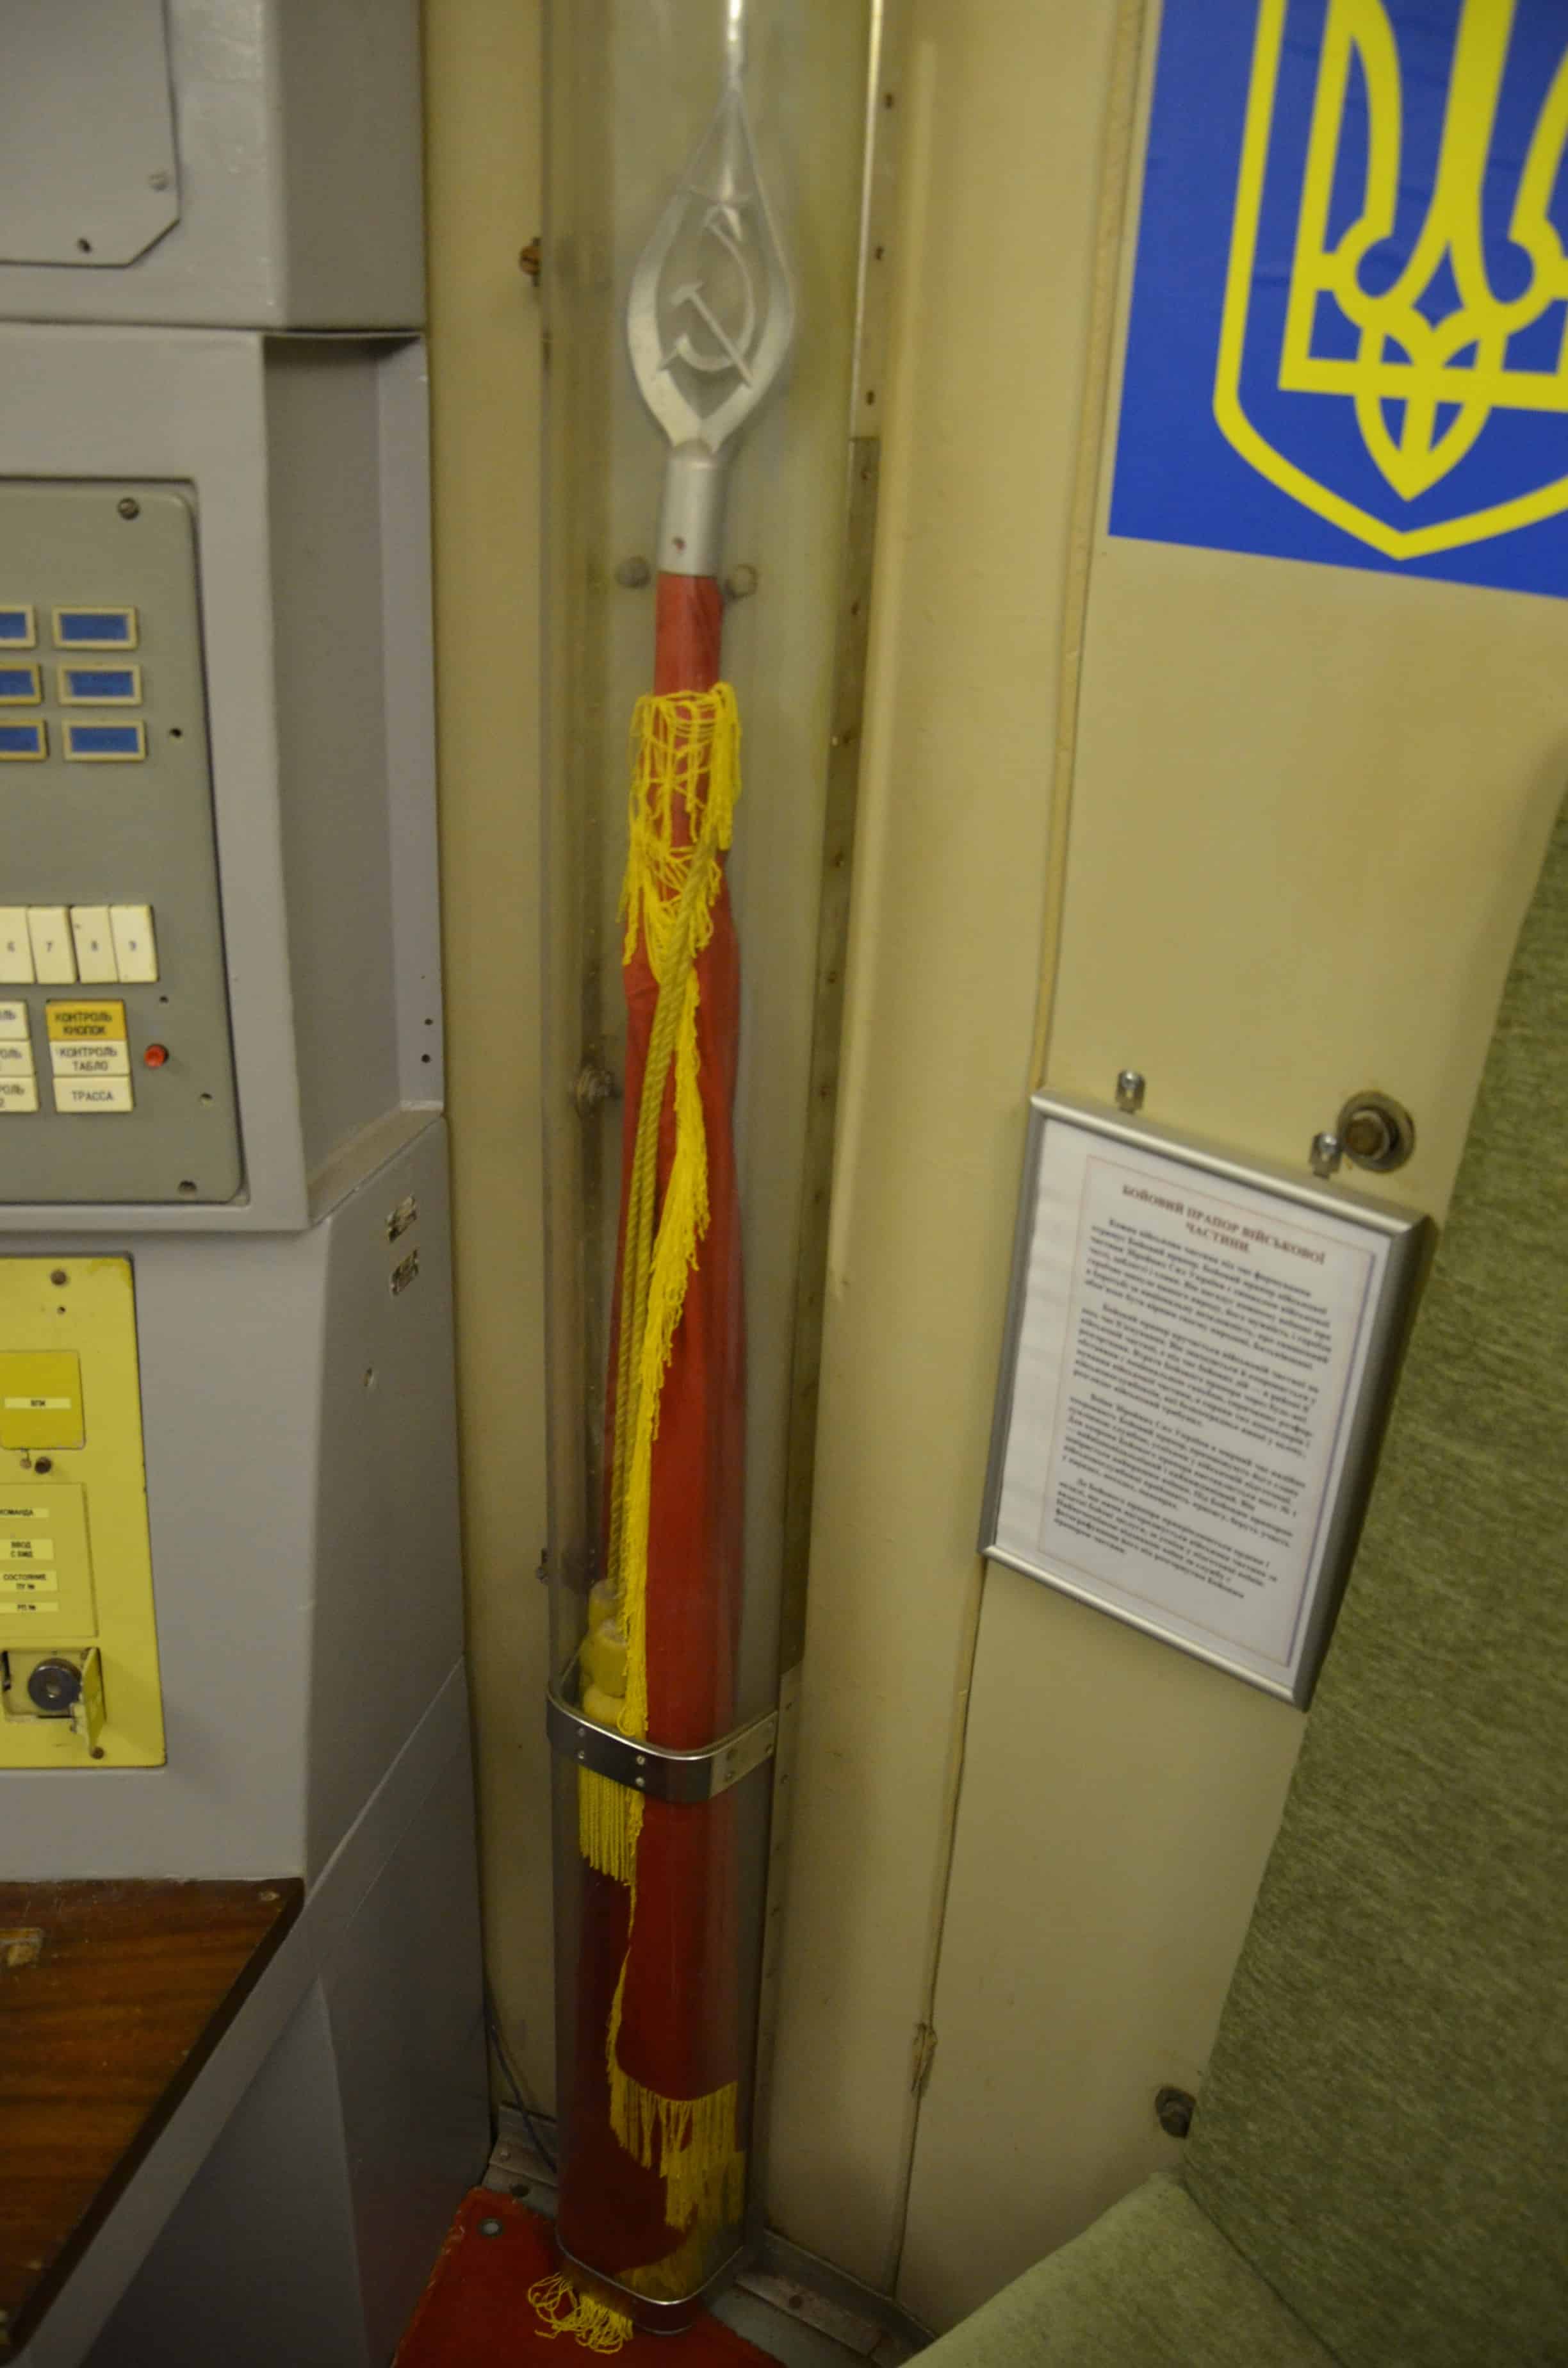 Soviet flag in the command post in the Unified Command Post at Strategic Missile Forces Museum near Pobuzke, Ukraine